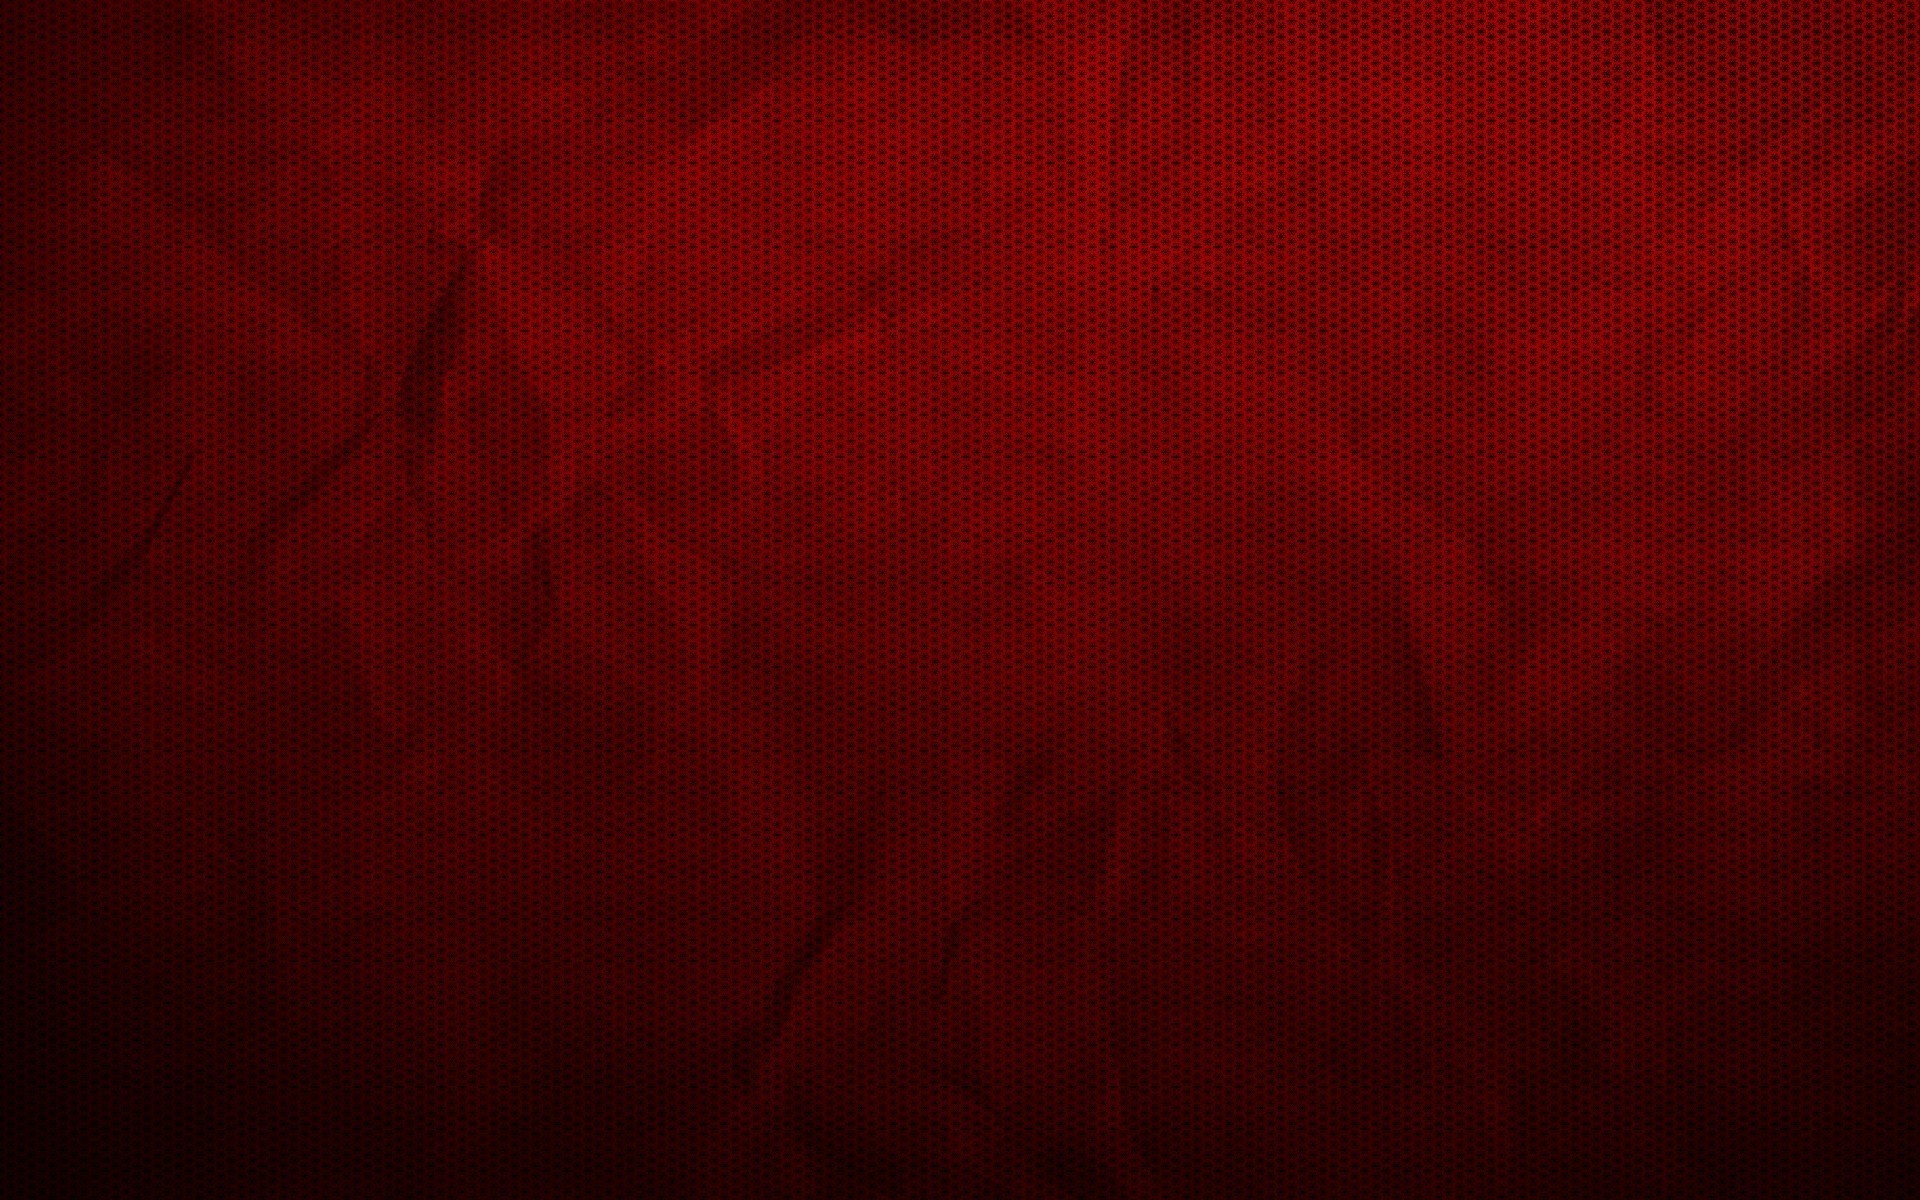 Marun-dark-red-color-plain-background-hd-wallpapers-gallery